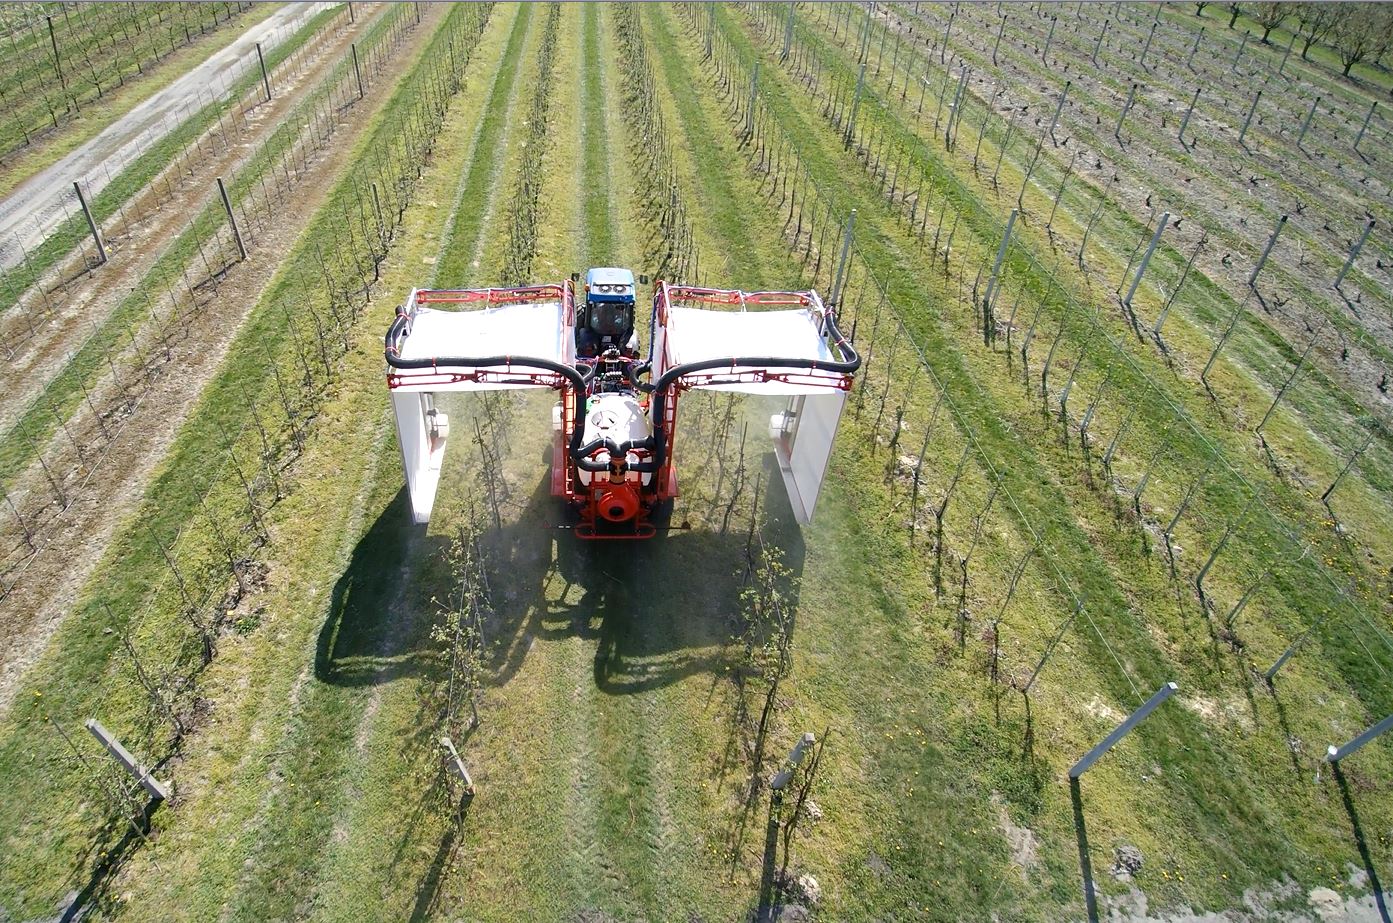 A family of innovative orchard tunnel sprayers with utility liquid recovery